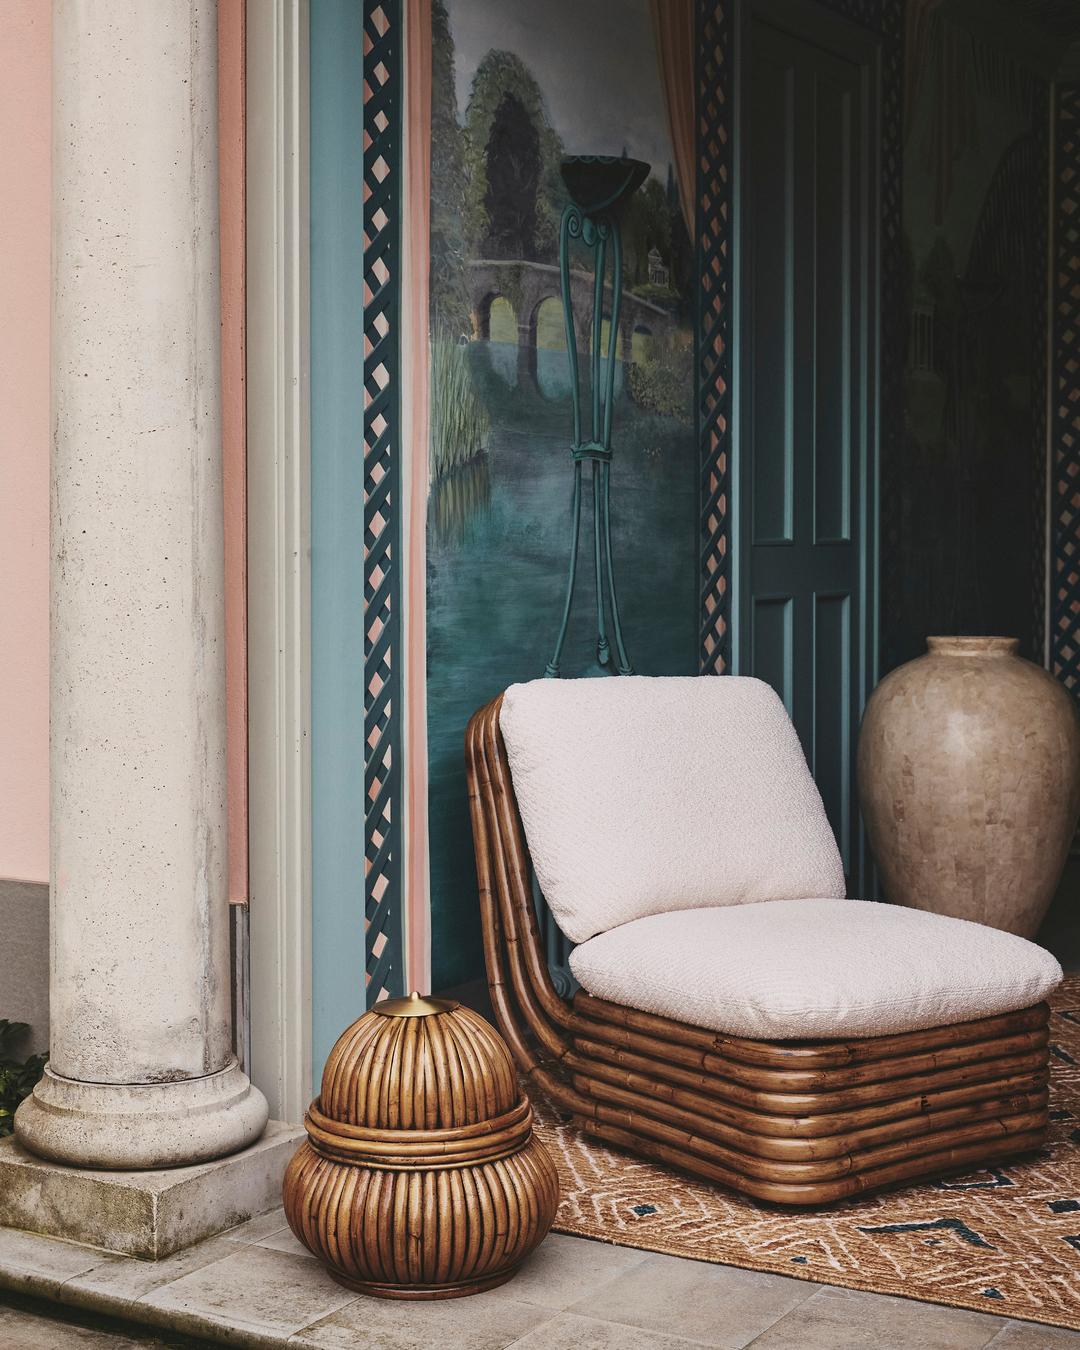 Comprising a lounge chair, three-seater sofa, ottoman and floor lamp – all crafted from rattan – the Bohemian 72 Collection embodies Crespi’s career-long aim to create furniture that seamlessly unites indoor and outdoor living. She never allowed